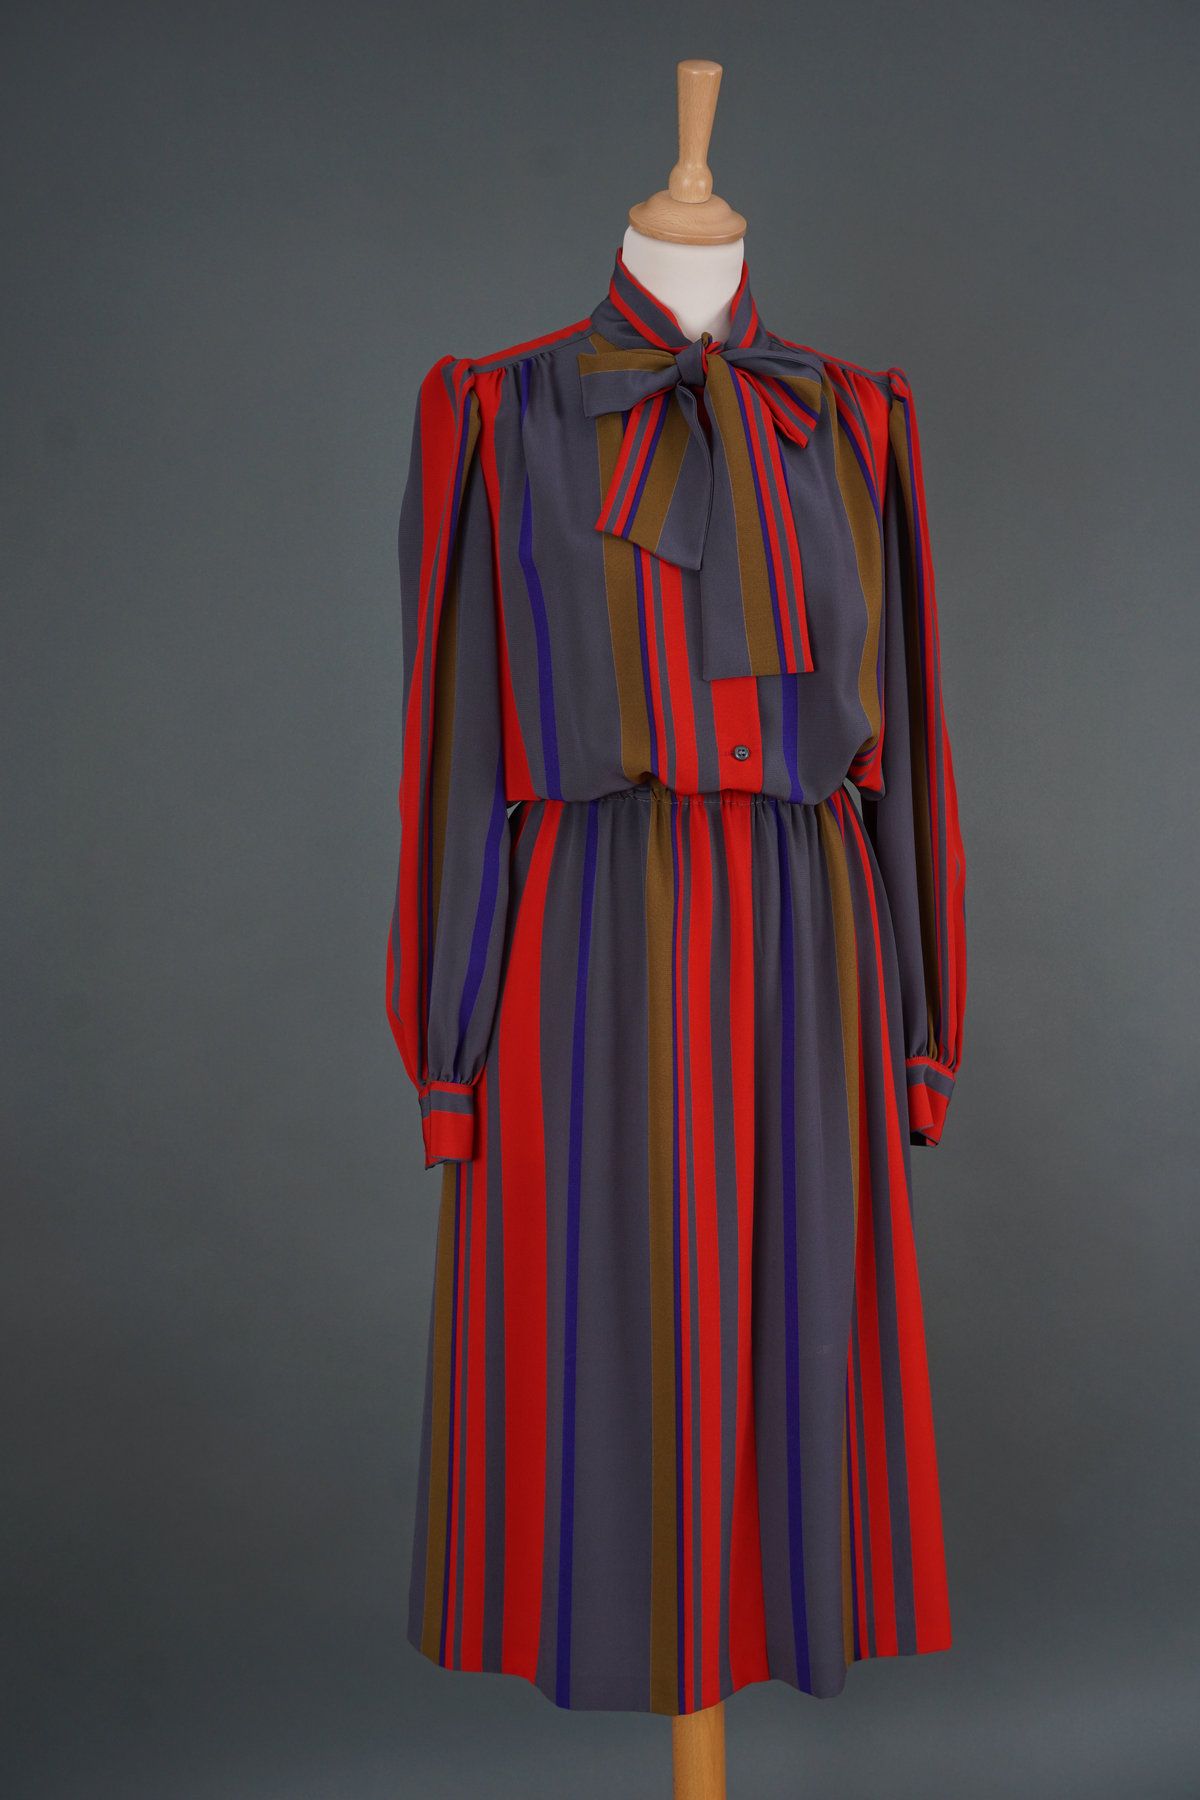 Red and blue striped dress | Price | Sale | Vintage | Retro